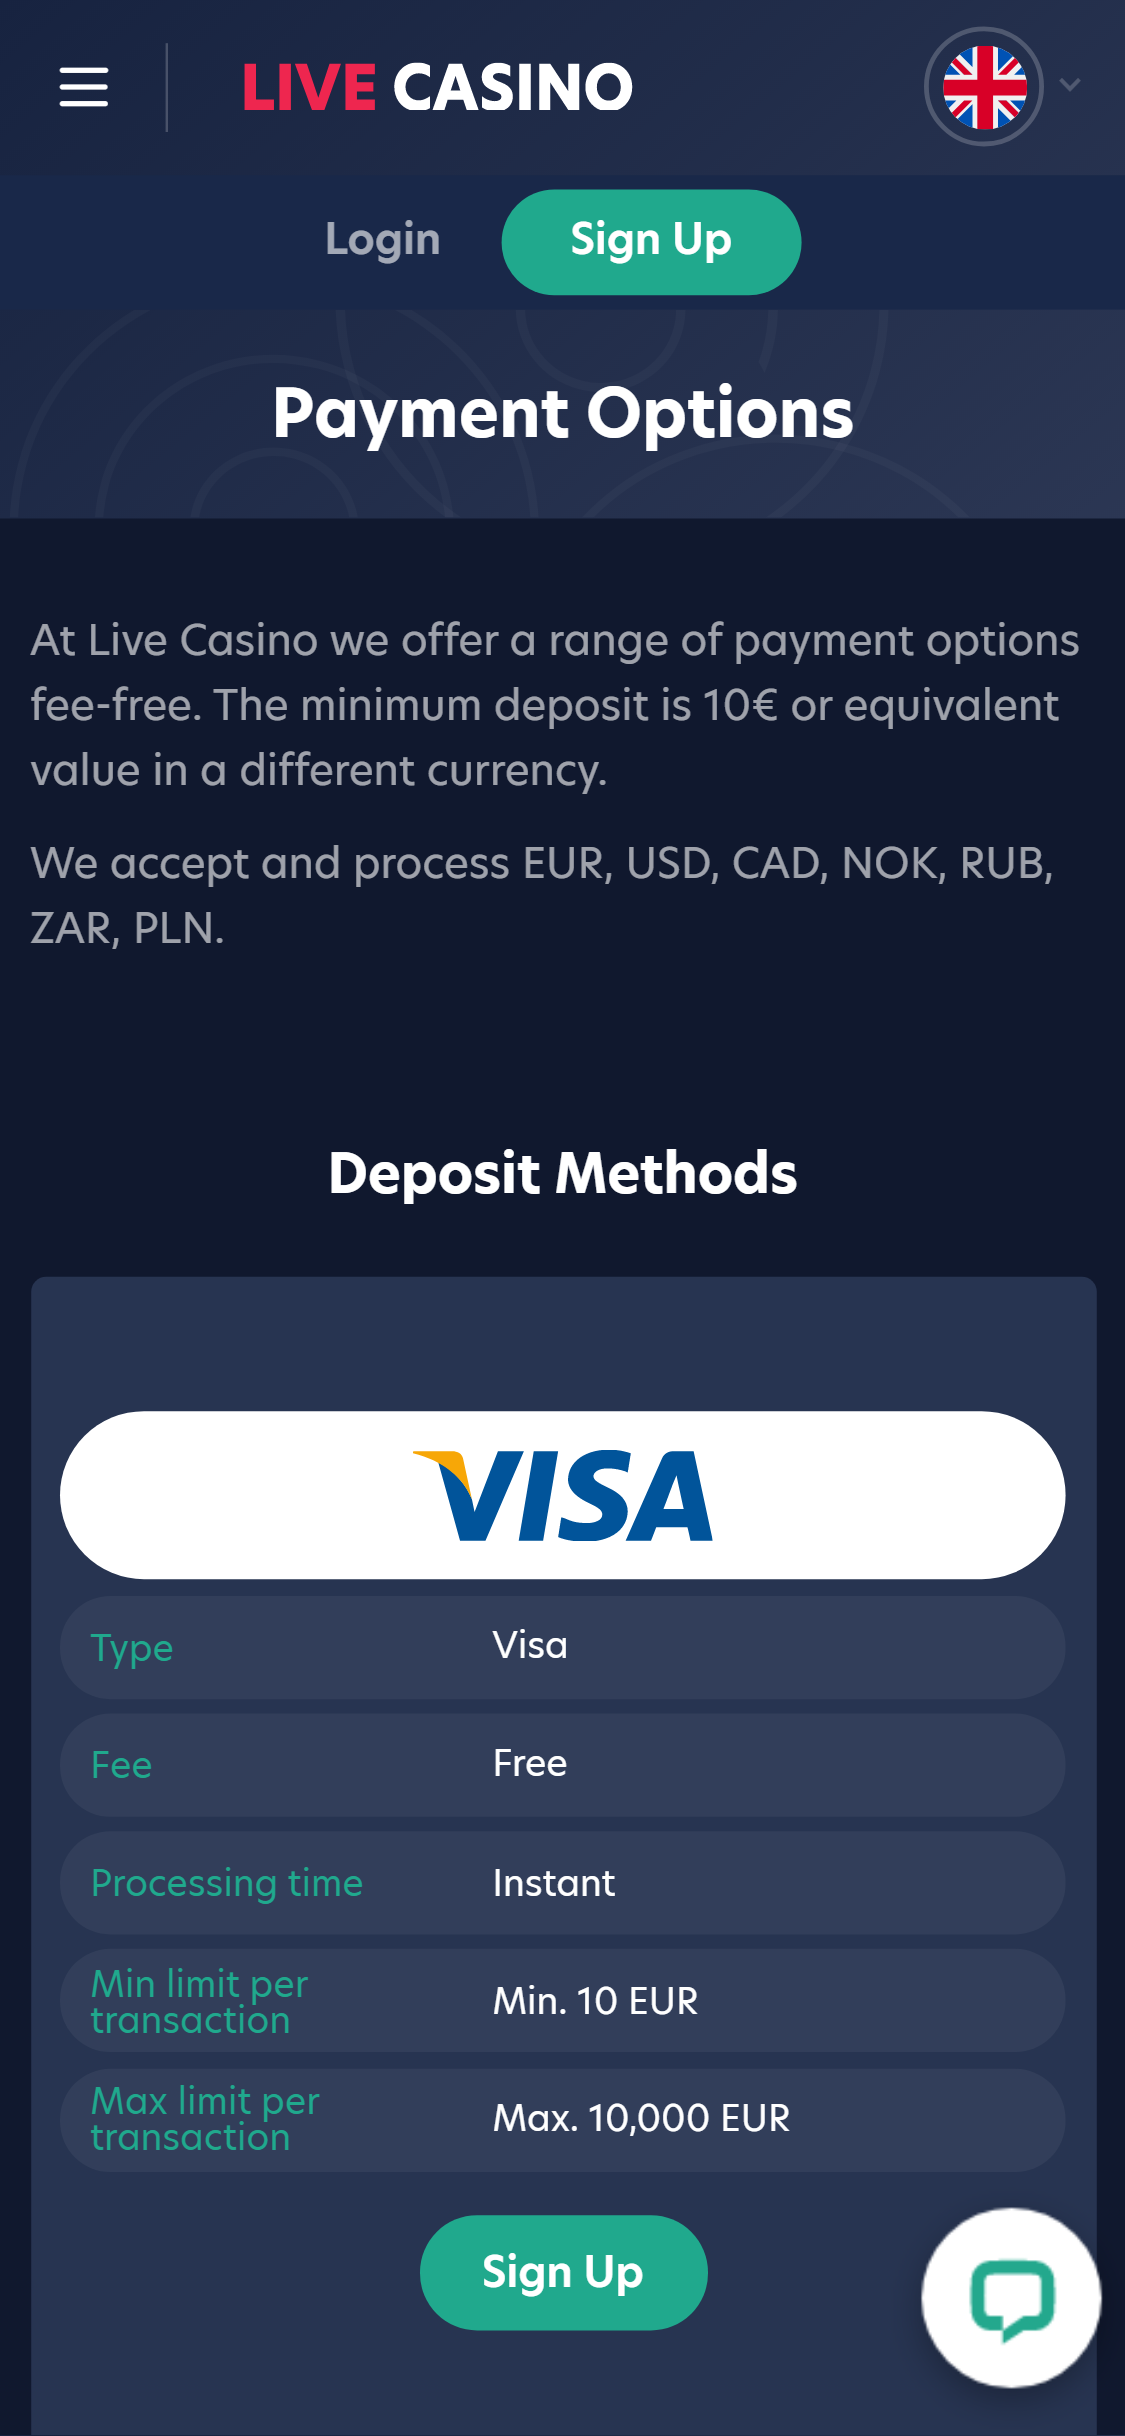 Live Casino Mobile Payment Methods Review